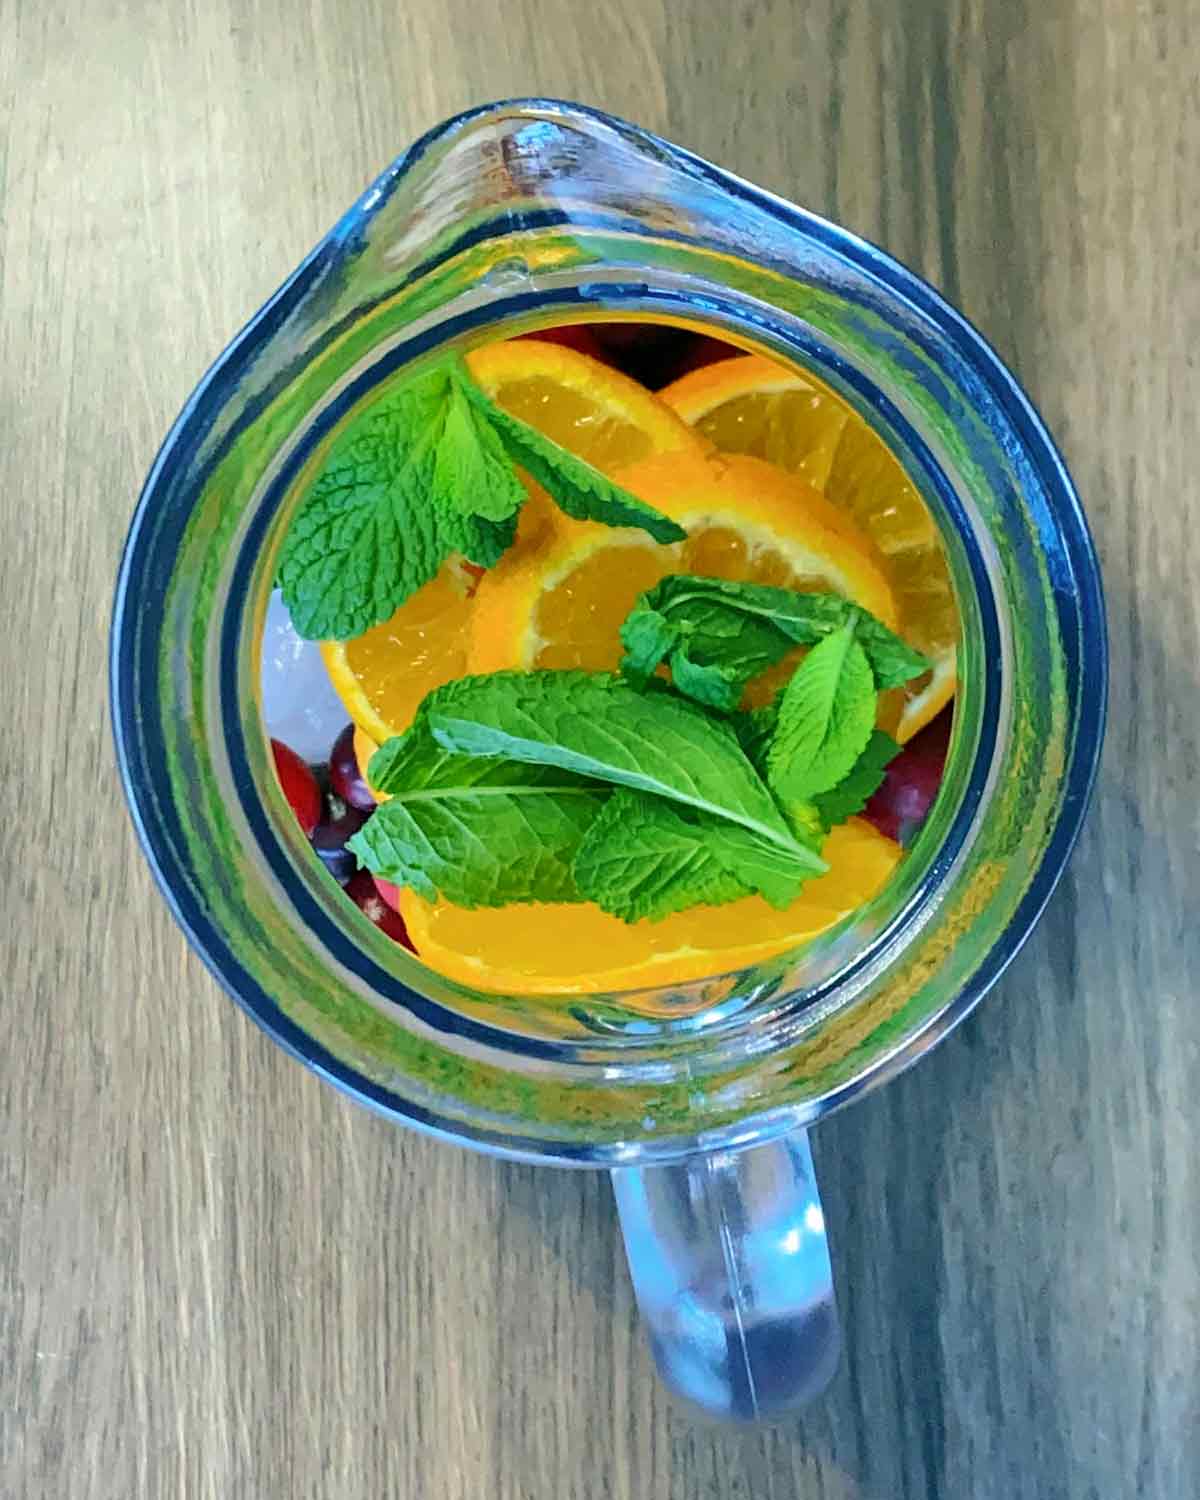 Clementine slices and mint leaves added to the jug.